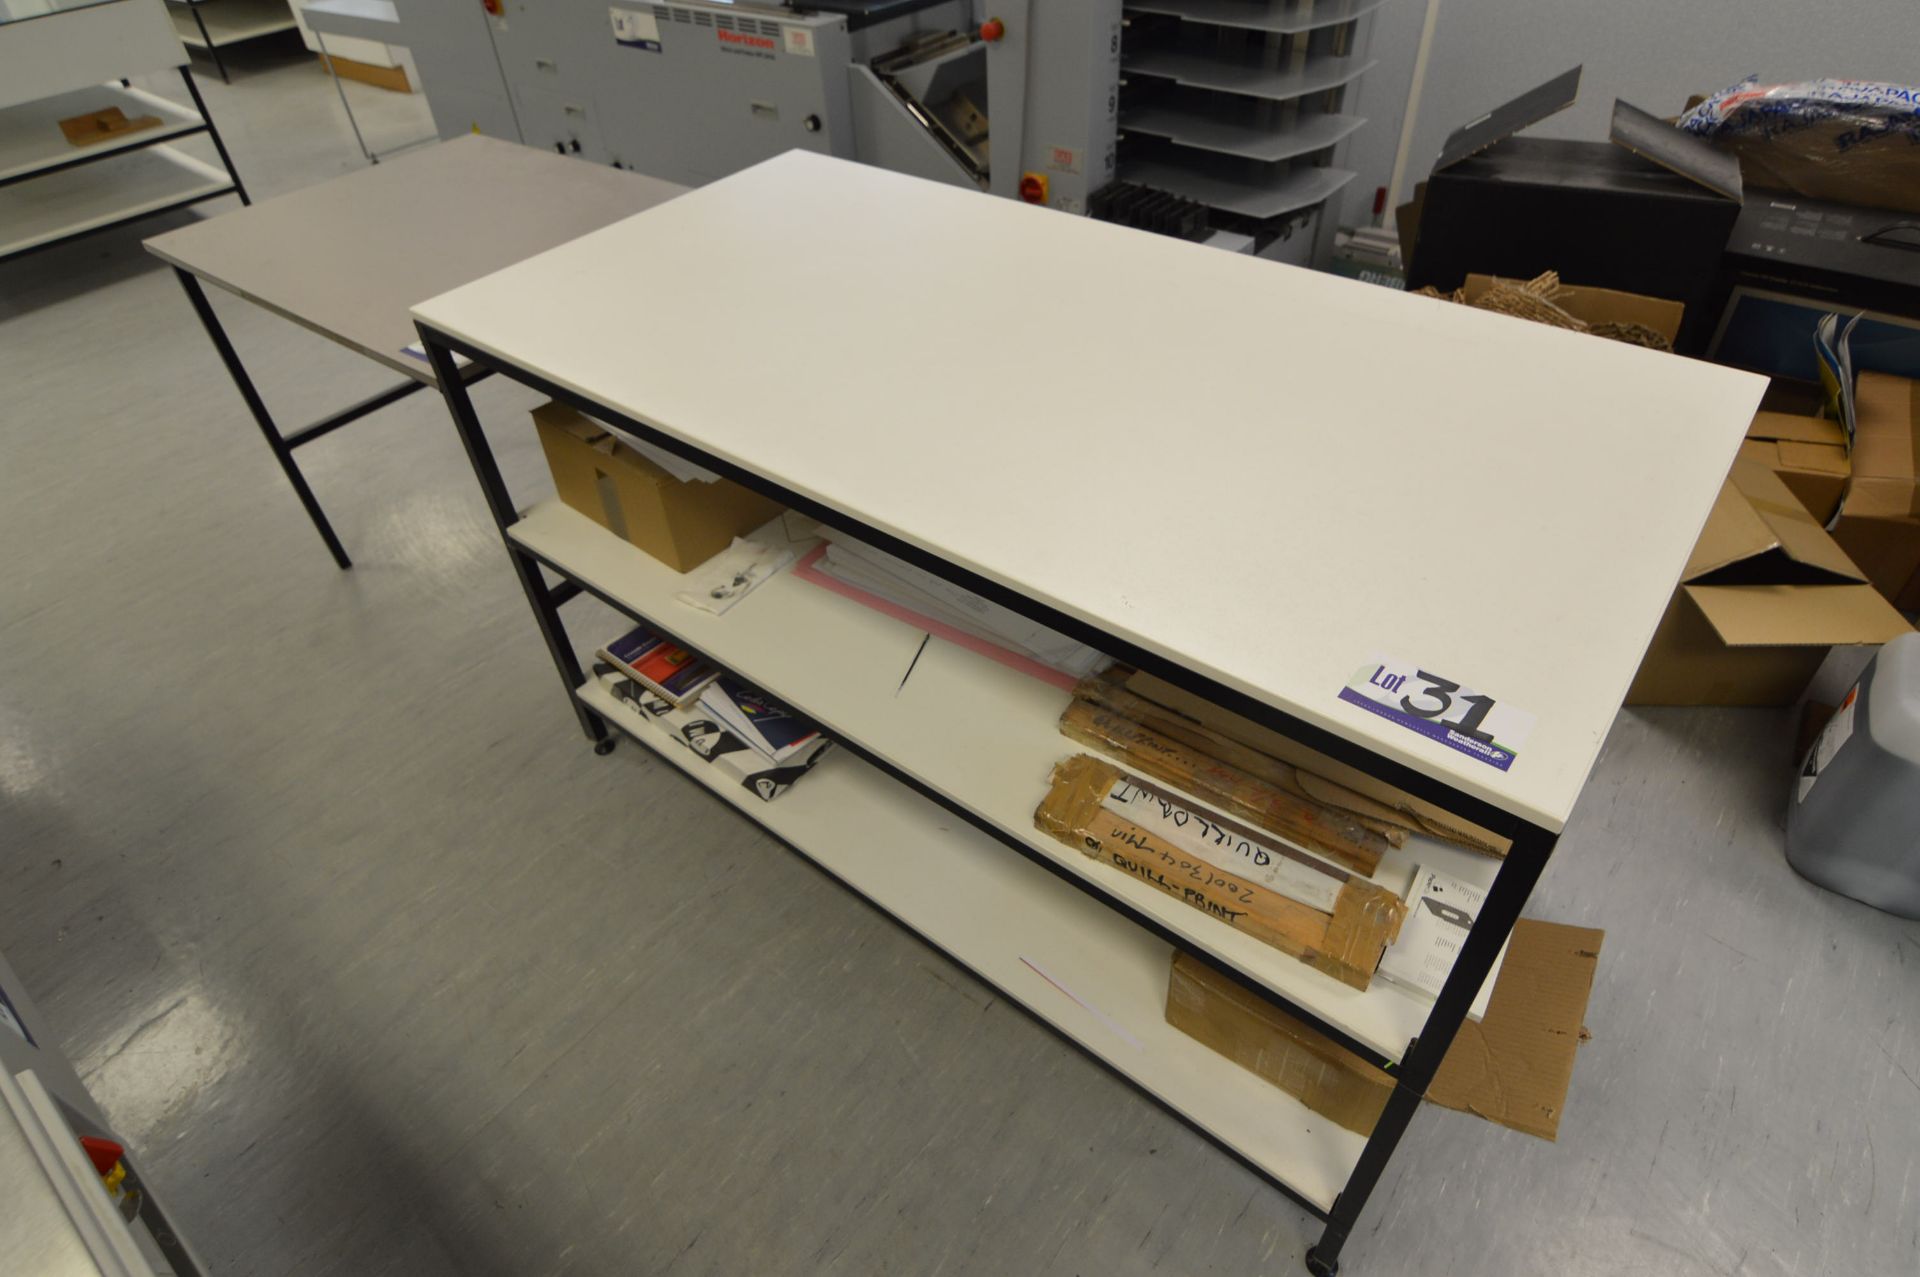 Steel Framed Worktable, approx. 1520mm x 765mm, with steel framed worktable, approx. 1060mm x 750mm